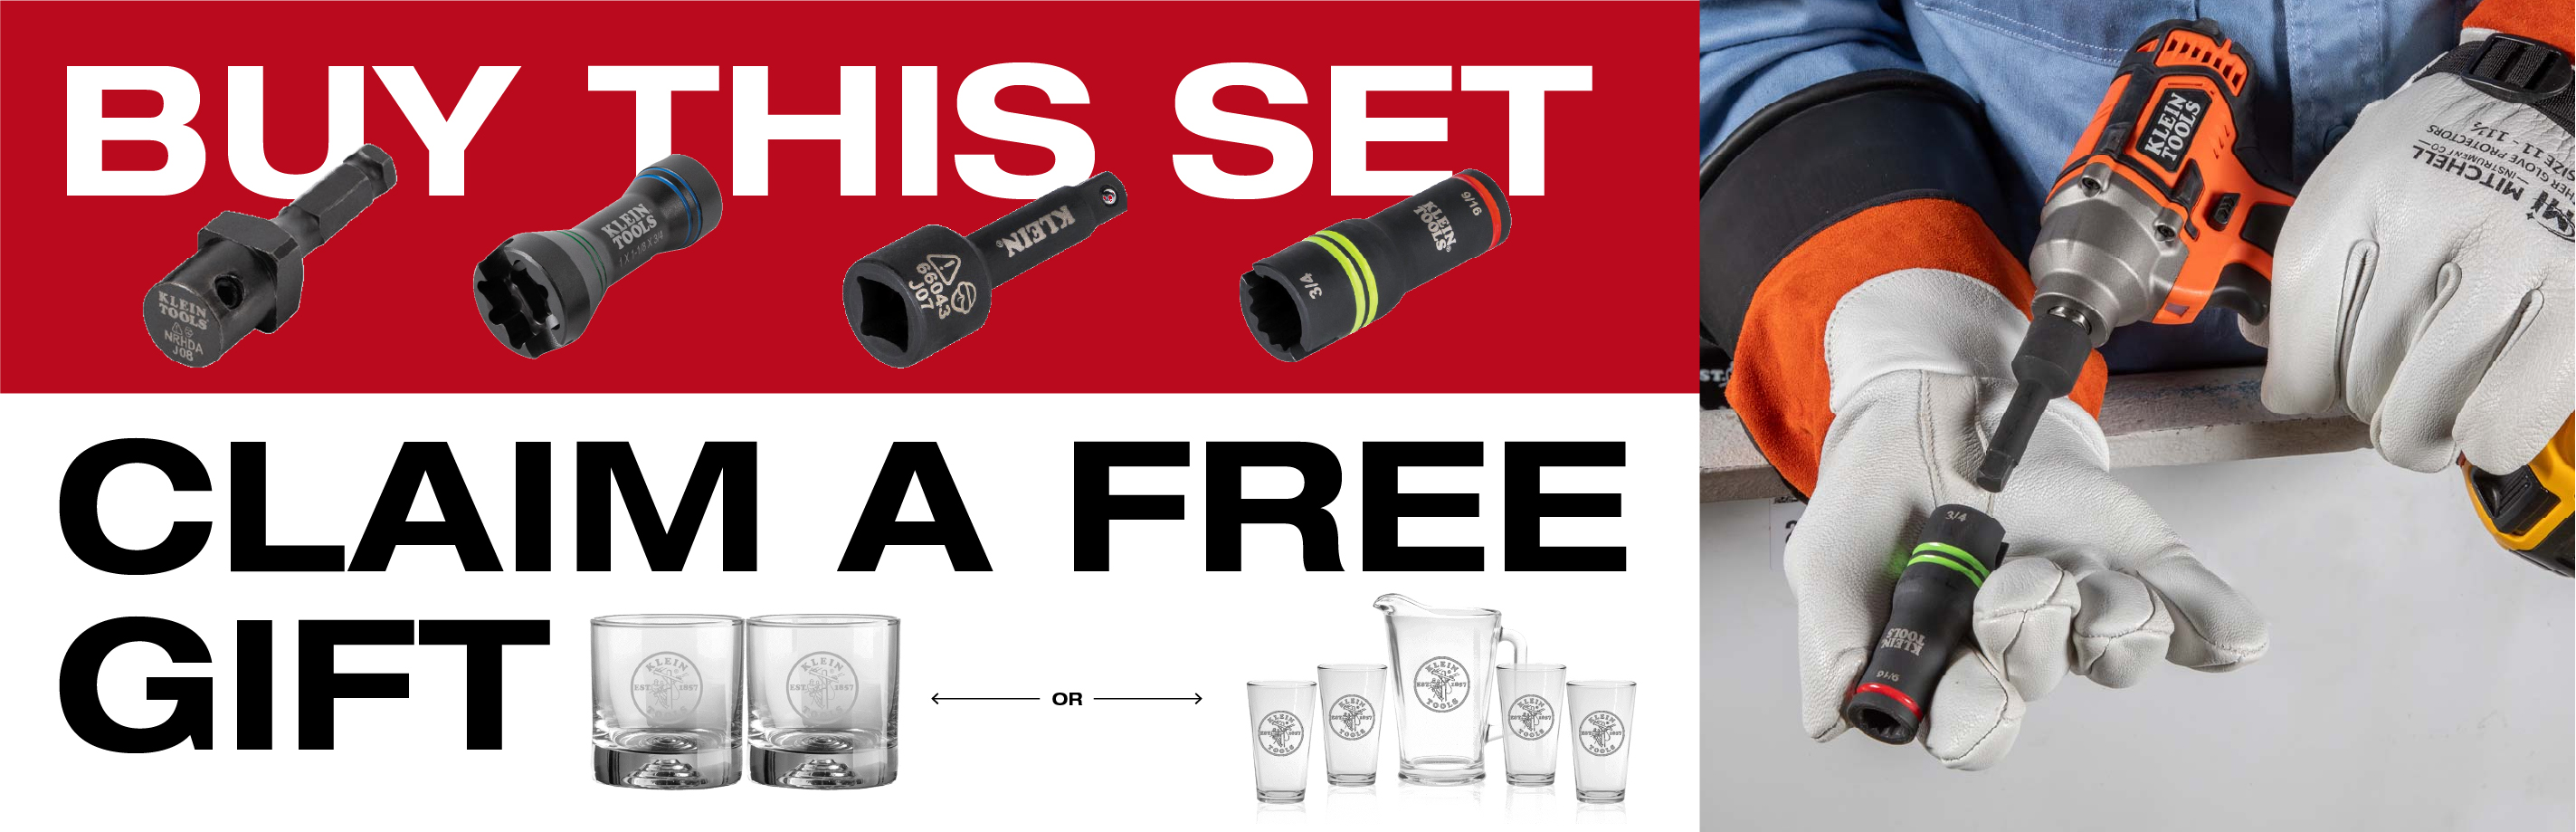  Get a free limited edition Klein drinkware set with the purchase of a socket kit. While supplies last!